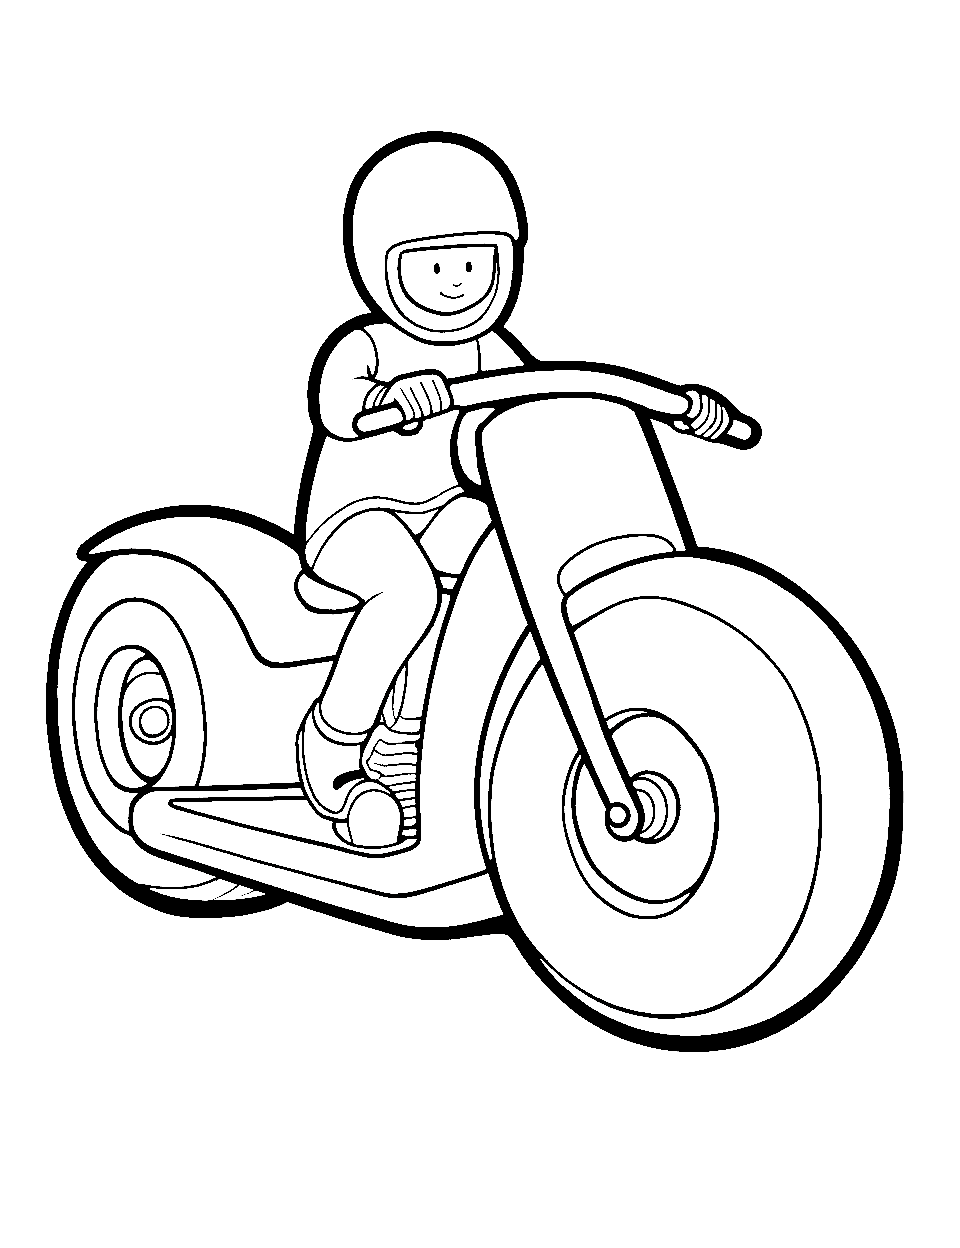 Motorcycle with Donut Wheels Coloring Page - A motorcyclist racing his bike with large donut wheels.